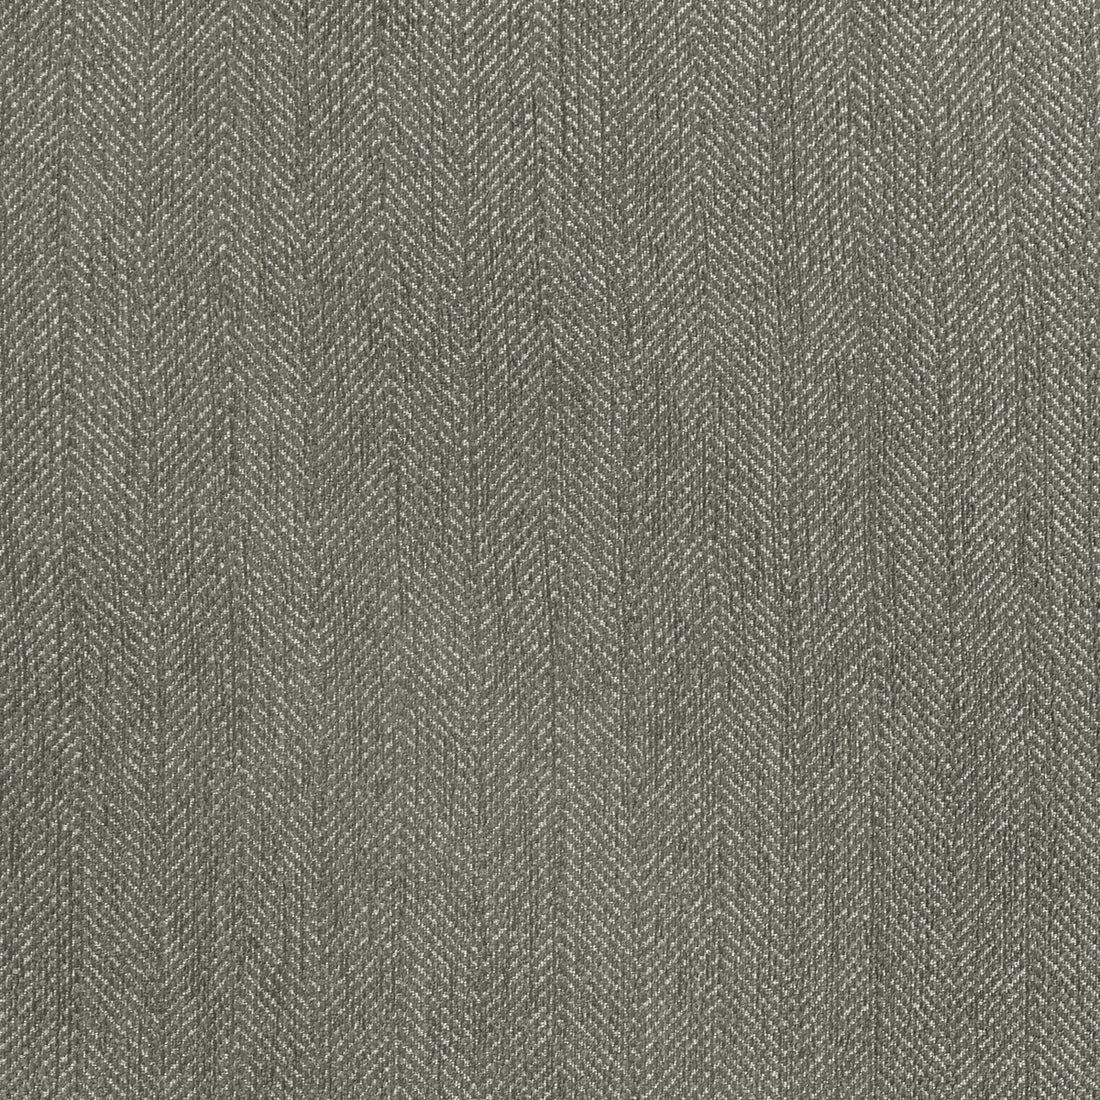 Healing Touch fabric in evening shade color - pattern 36389.52.0 - by Kravet Design in the Crypton Home - Celliant collection